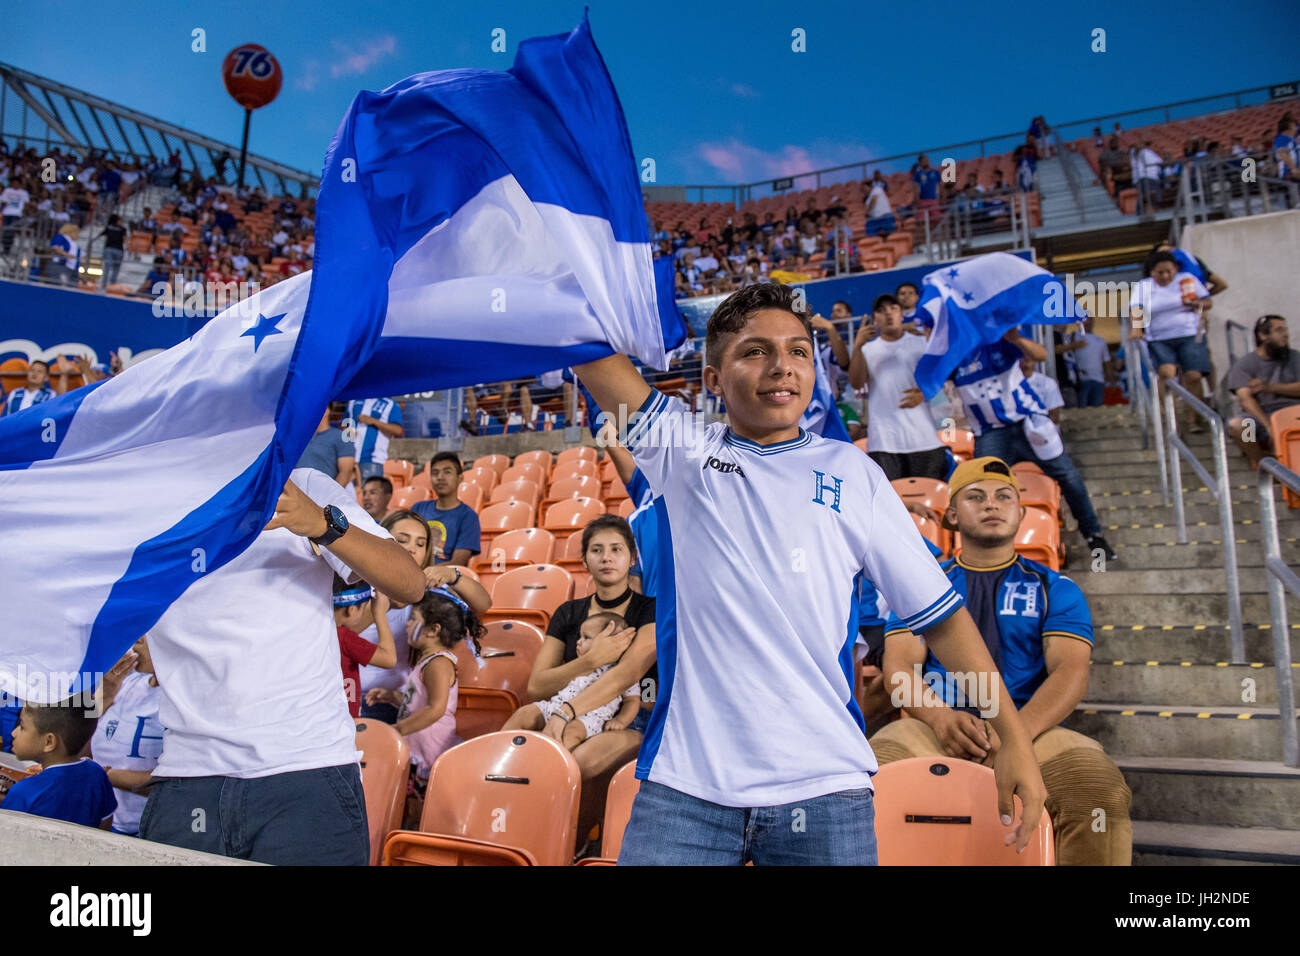 Houston, Texas, USA. 11th July, 2017. Honduras fans at an international CONCACAF Gold Cup soccer match between Honduras and French Guiana at BBVA Compass Stadium. The game ended in a 0-0 draw. Credit: Trask Smith/ZUMA Wire/Alamy Live News Stock Photo